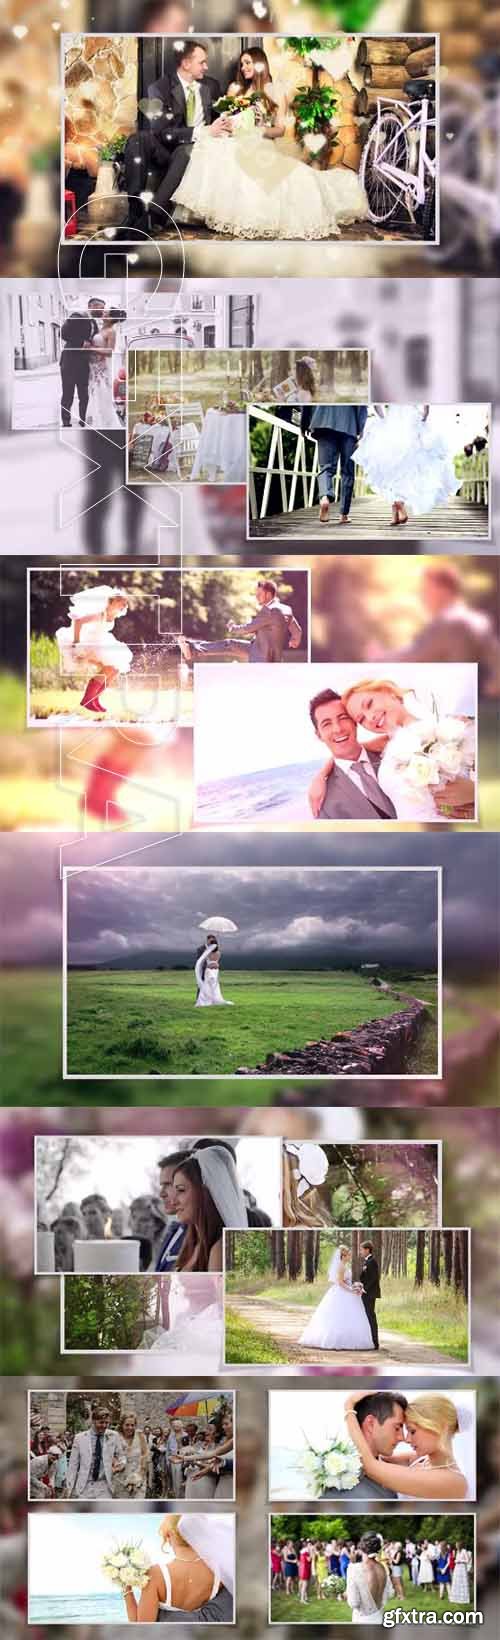 Wedding Slideshow - After Effects 65356